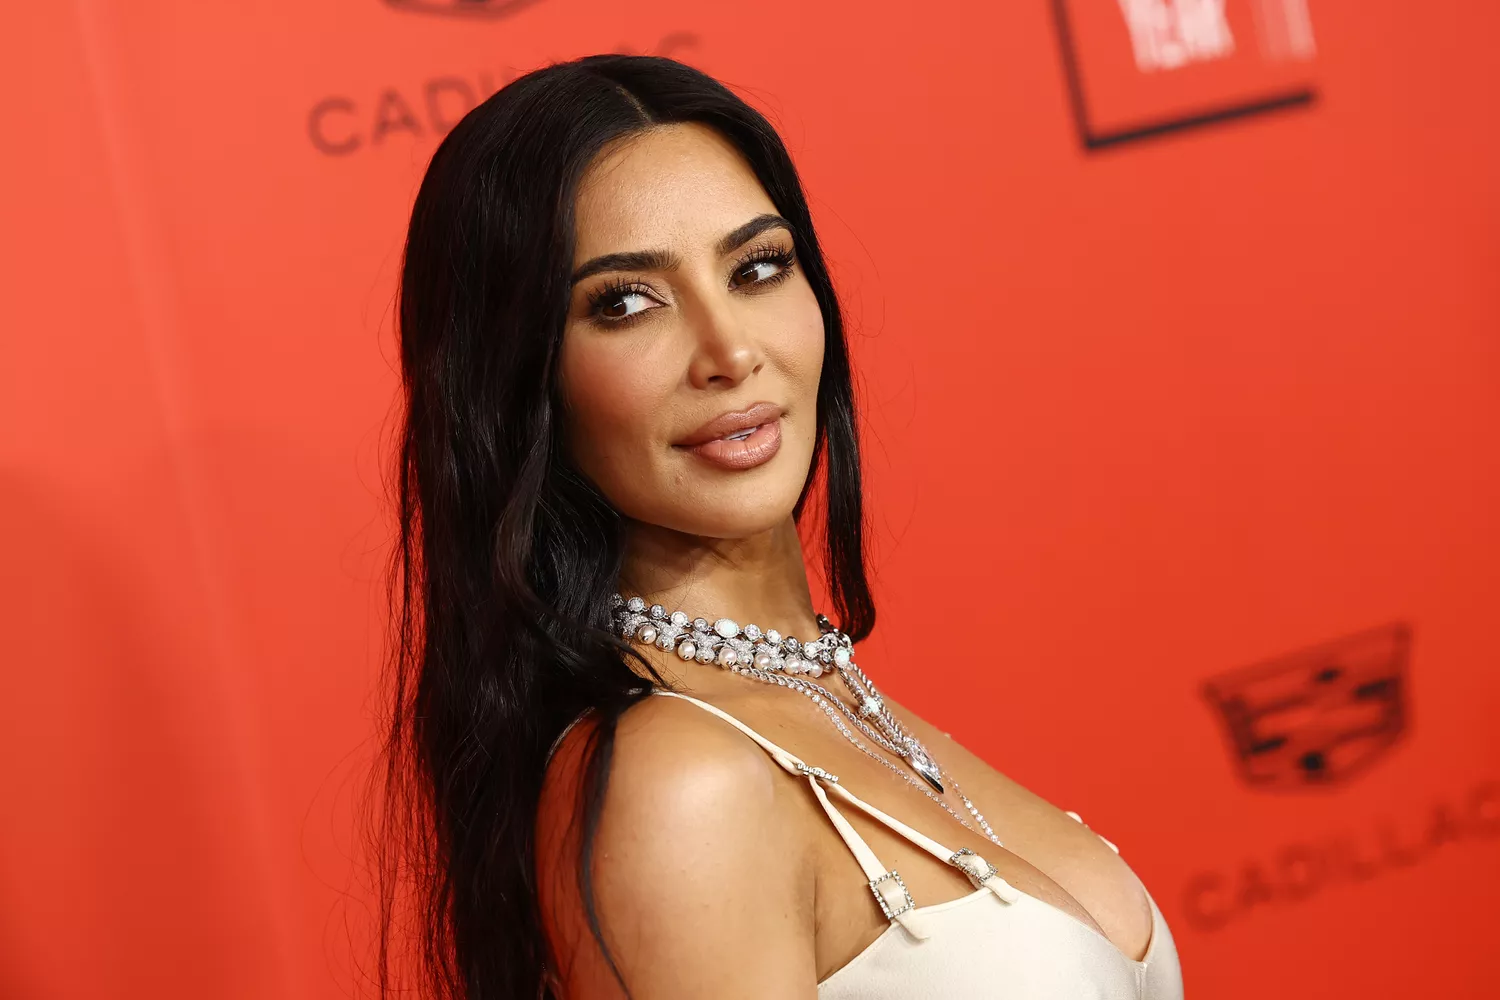 Kim Kardashian Just Debuted What Might Be Her Shortest Haircut Yet